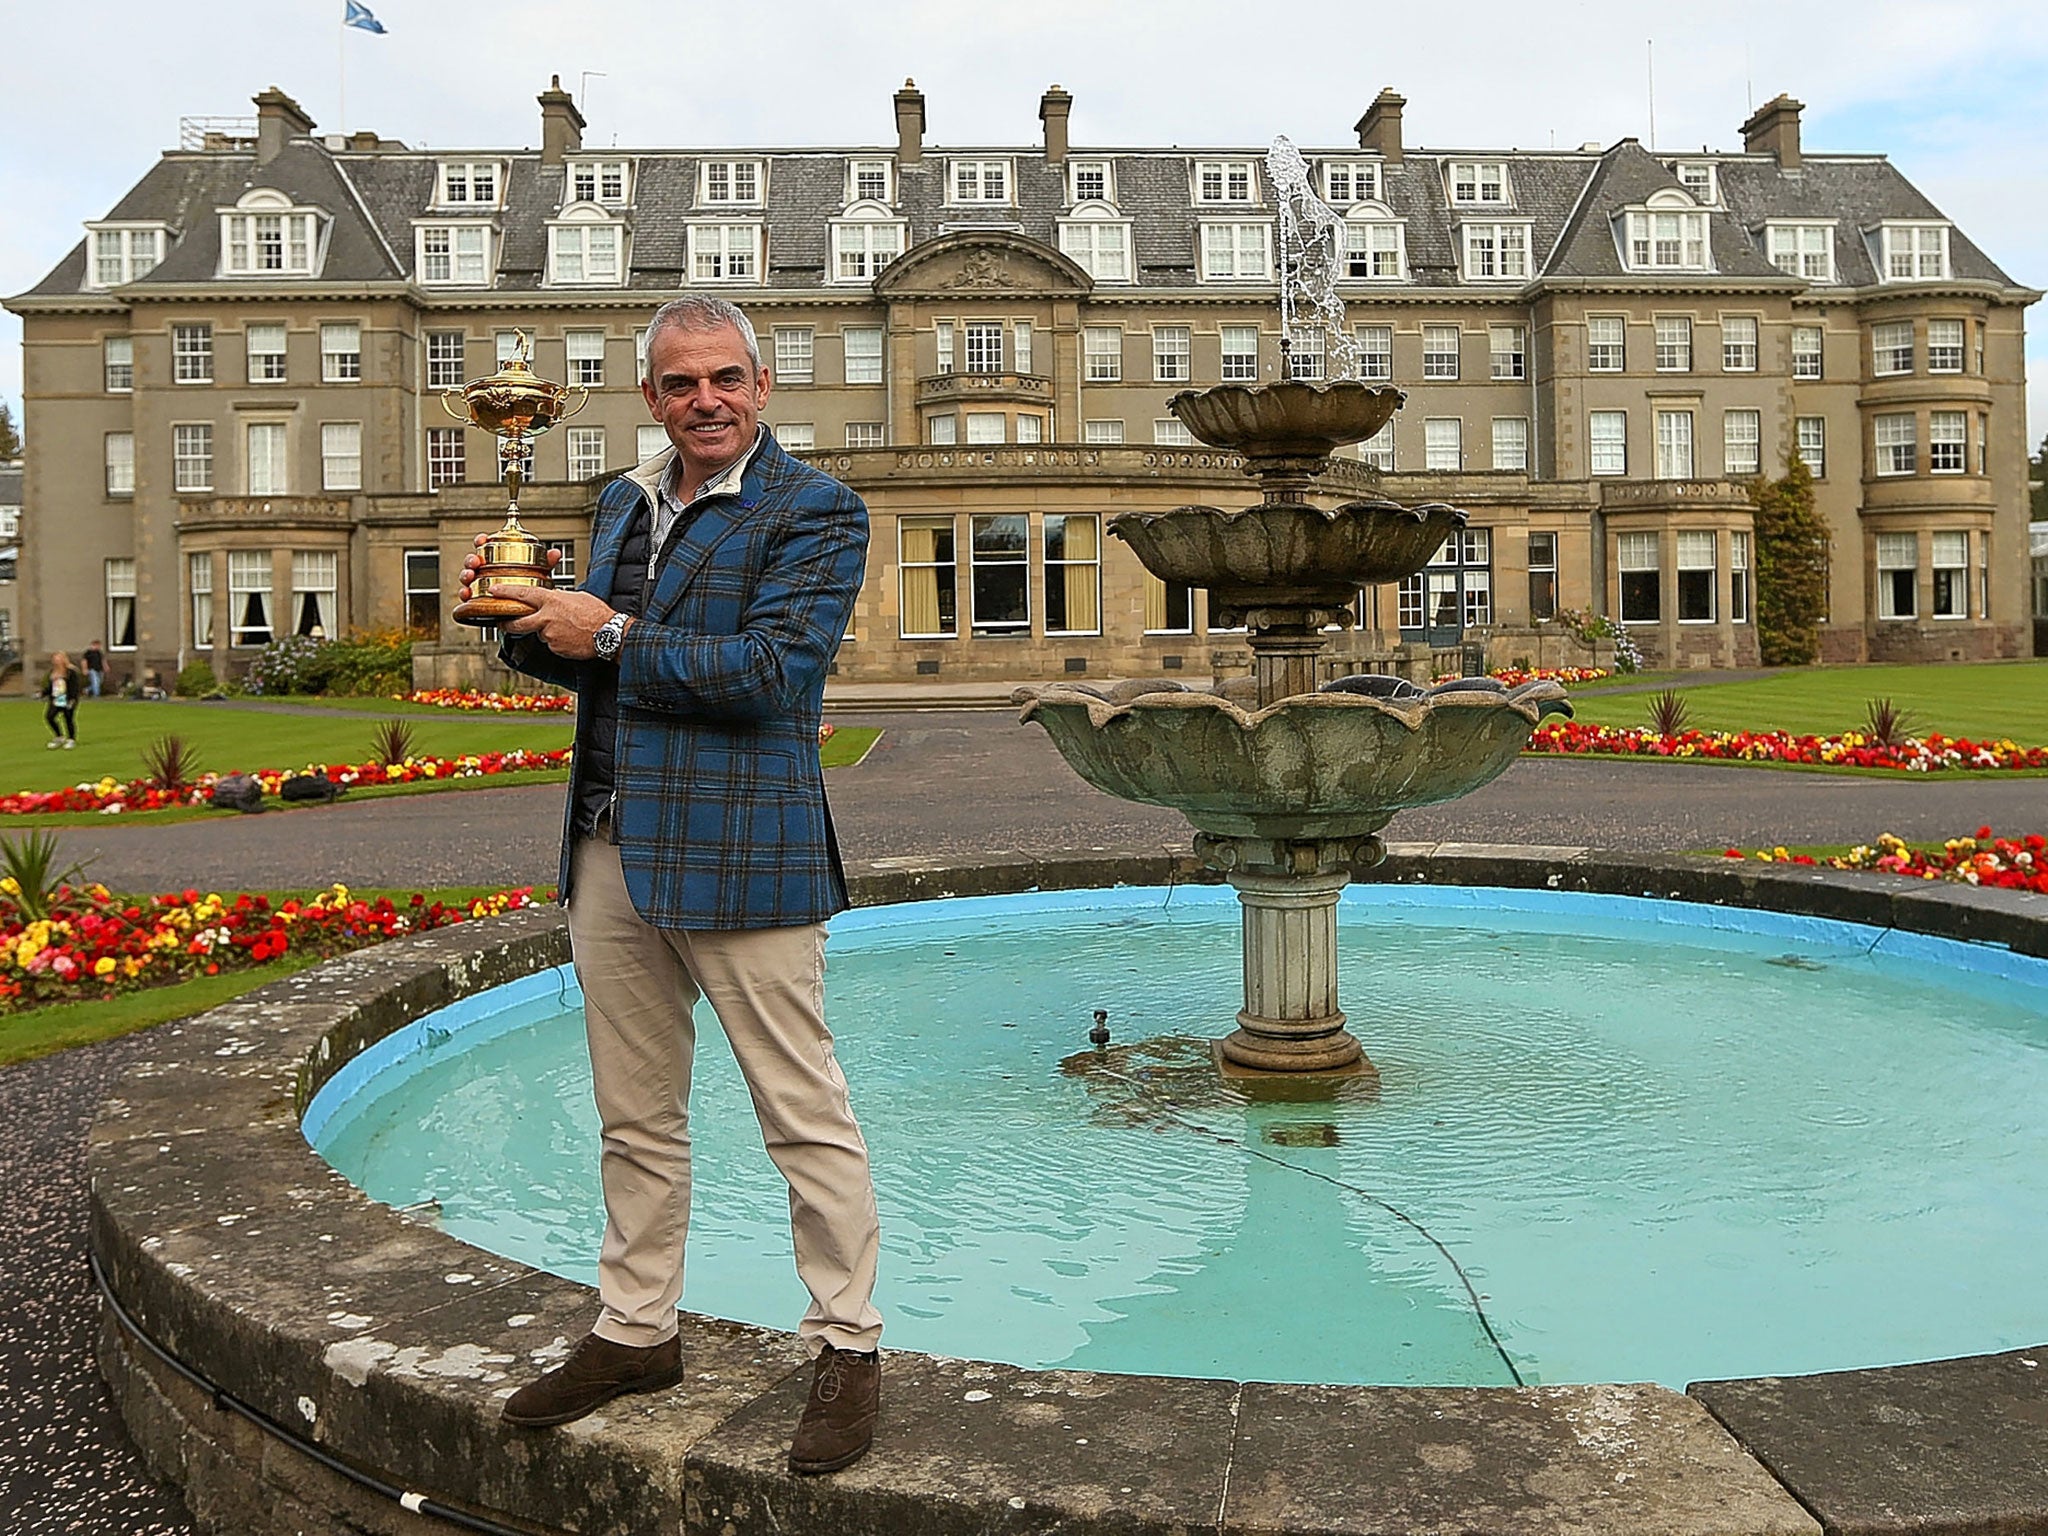 Paul McGinley shows off the Ryder Cup at Gleneagles after Europe’s 16½-11½ victory in September